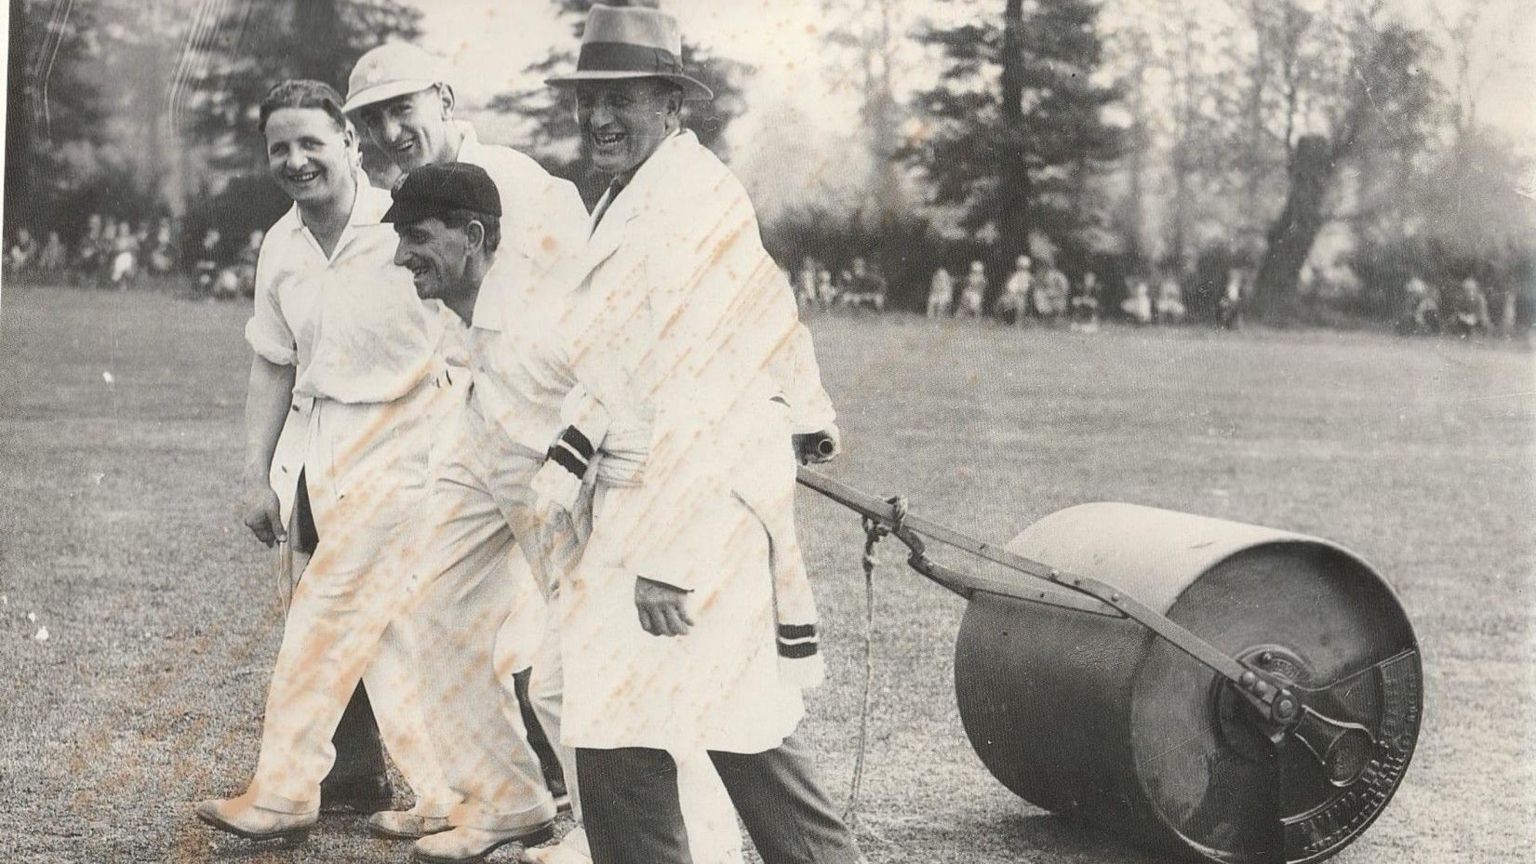 Four men pulling cricket pitch roller in black and white photo